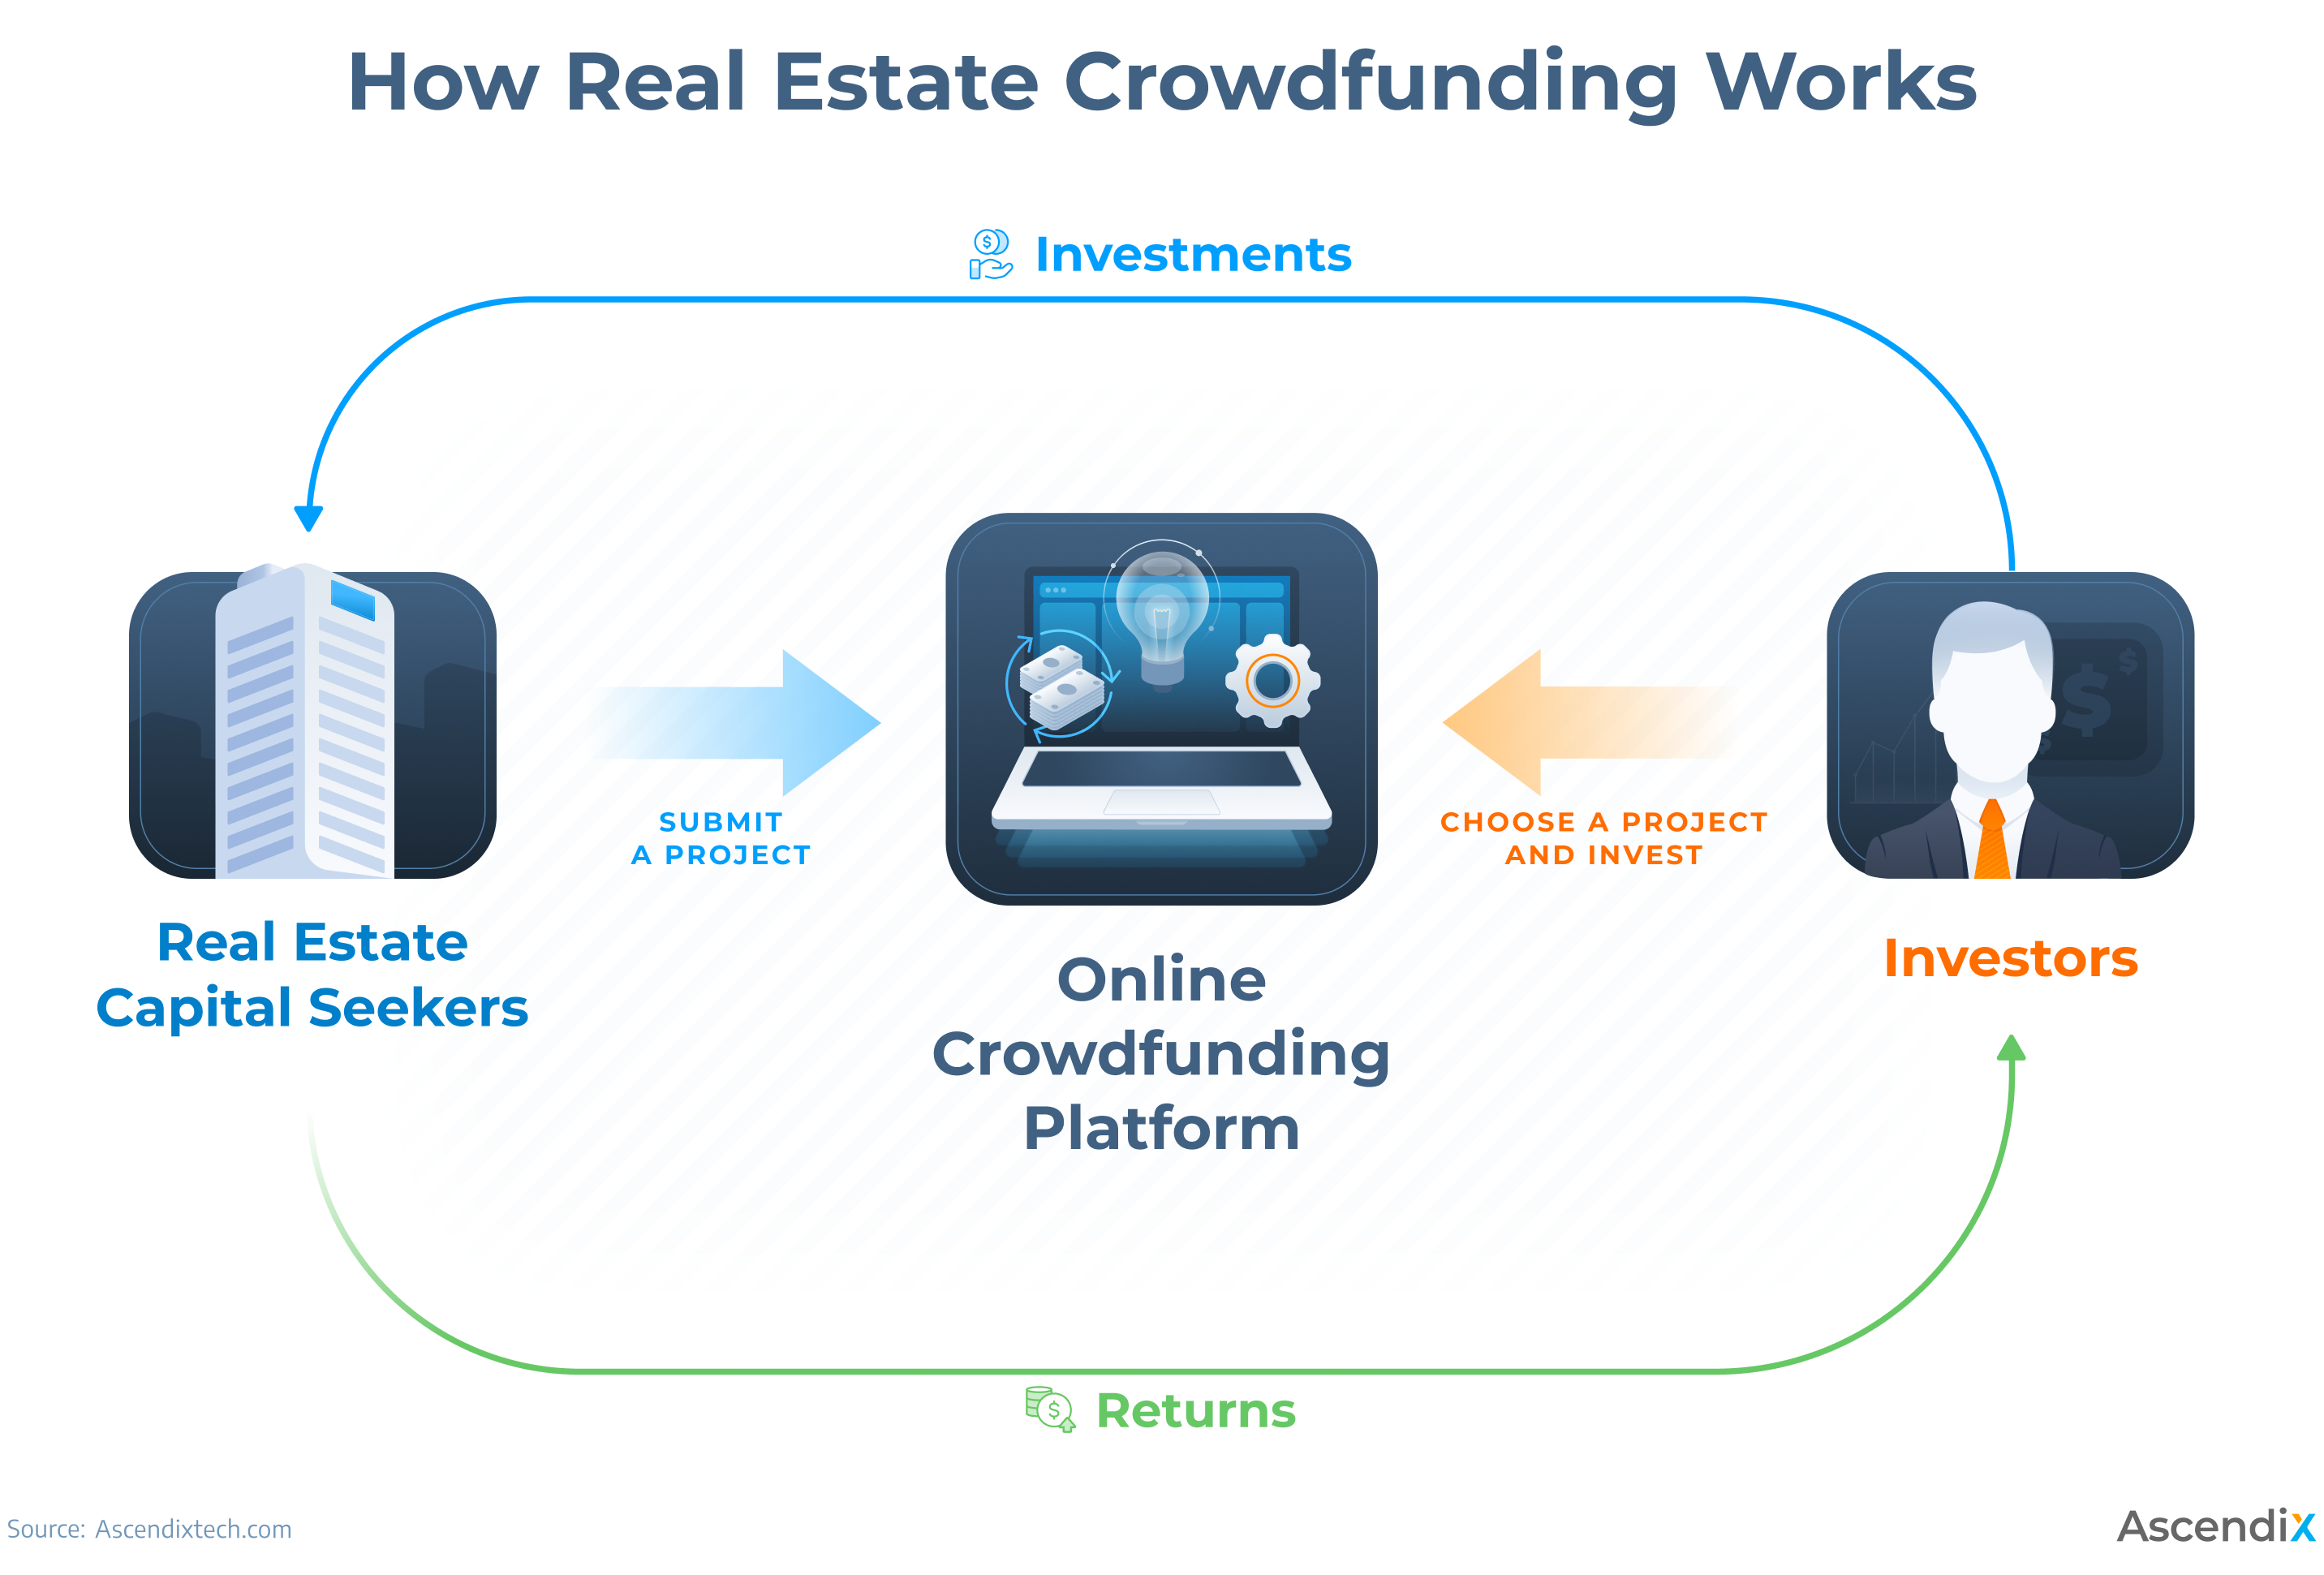 How Real Estate Crowdfunding Works